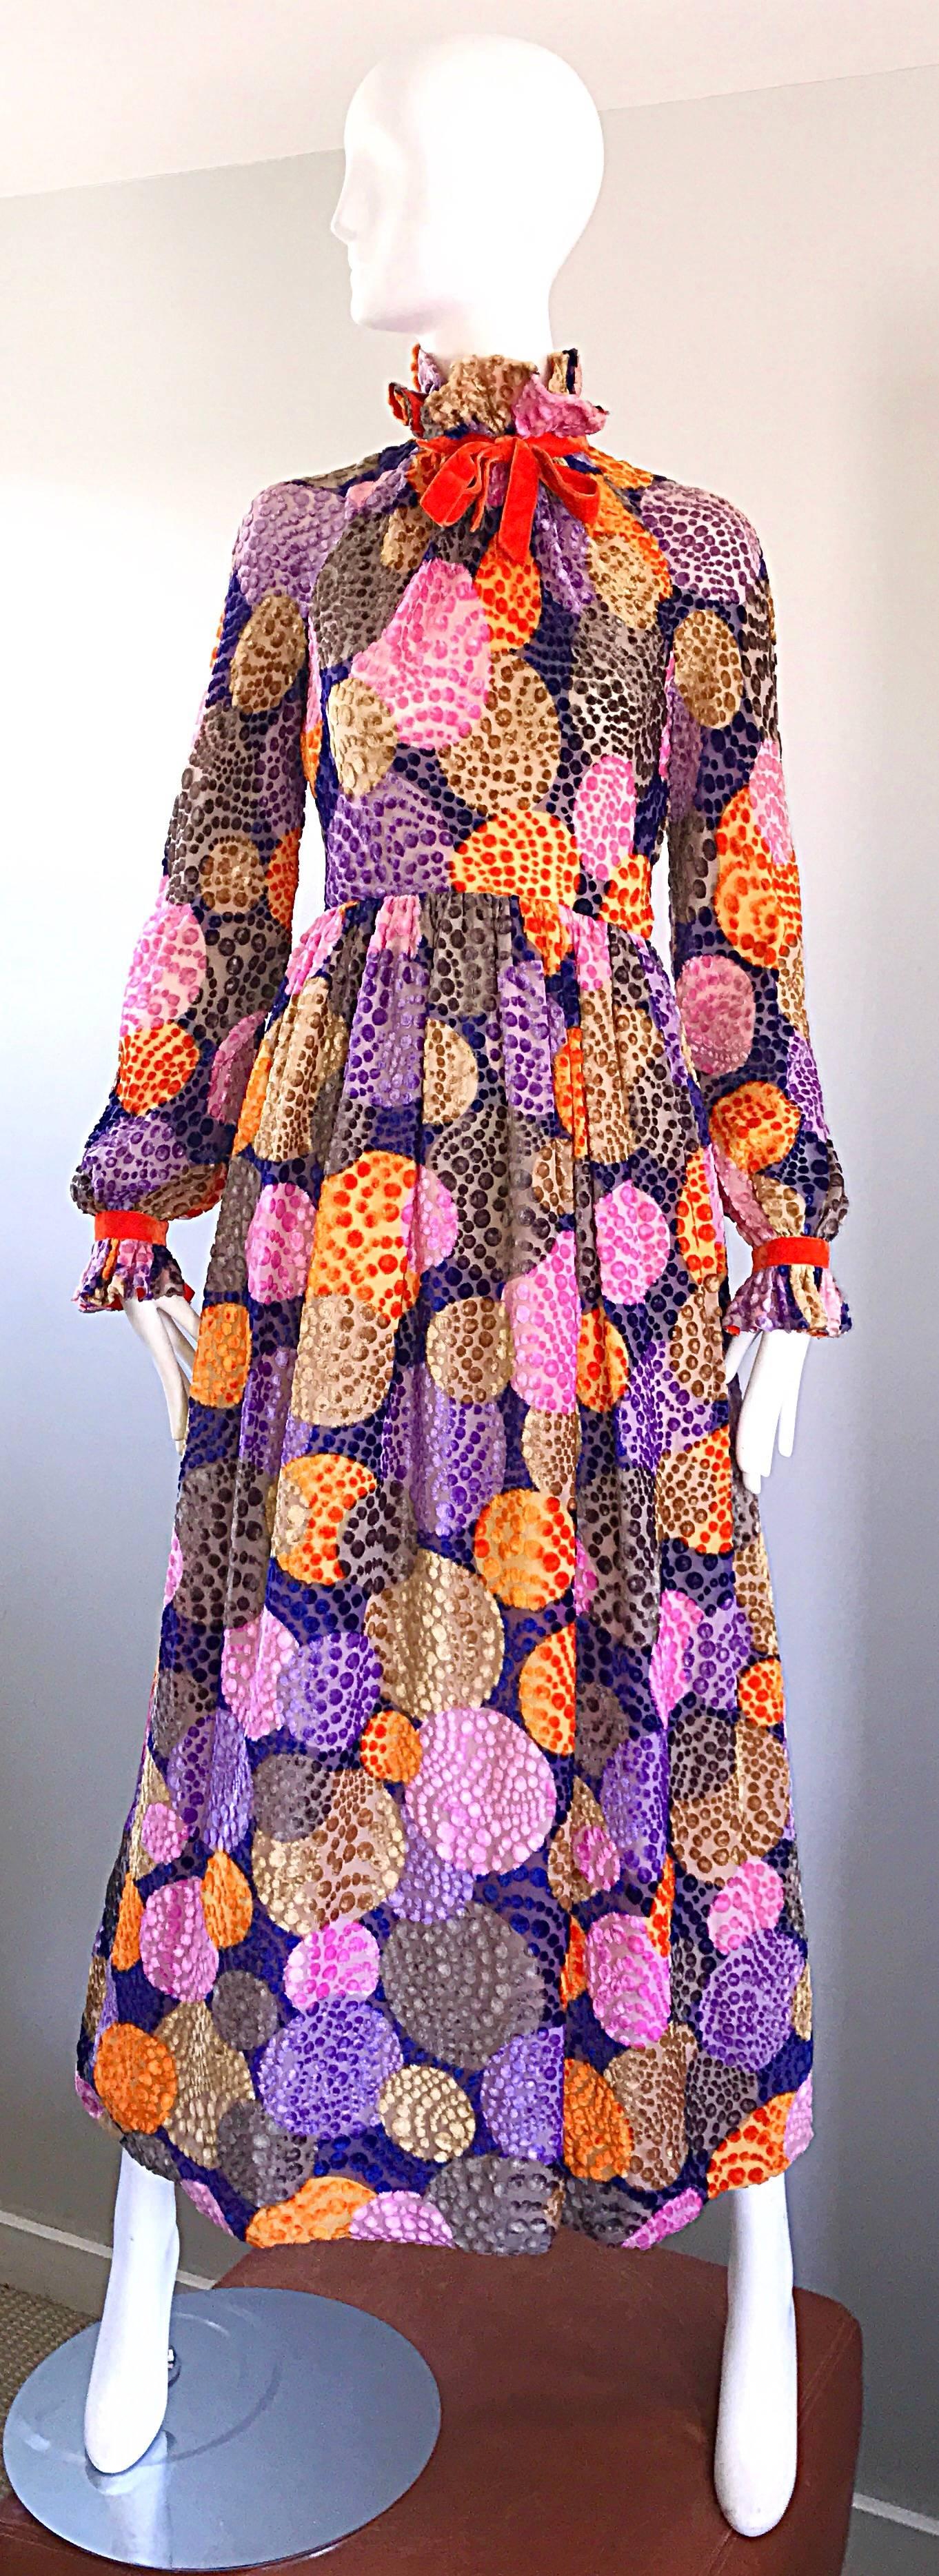 Sensational 1970s GEOFFREY BEENE silk velvet cut-out maxi dress! Features vibrant large polka dots in purple, orange, pink, taupe and brown throughout. Victorian inspired high neck with a pre-tied orange velvet bow. Hidden metal zipper up the back